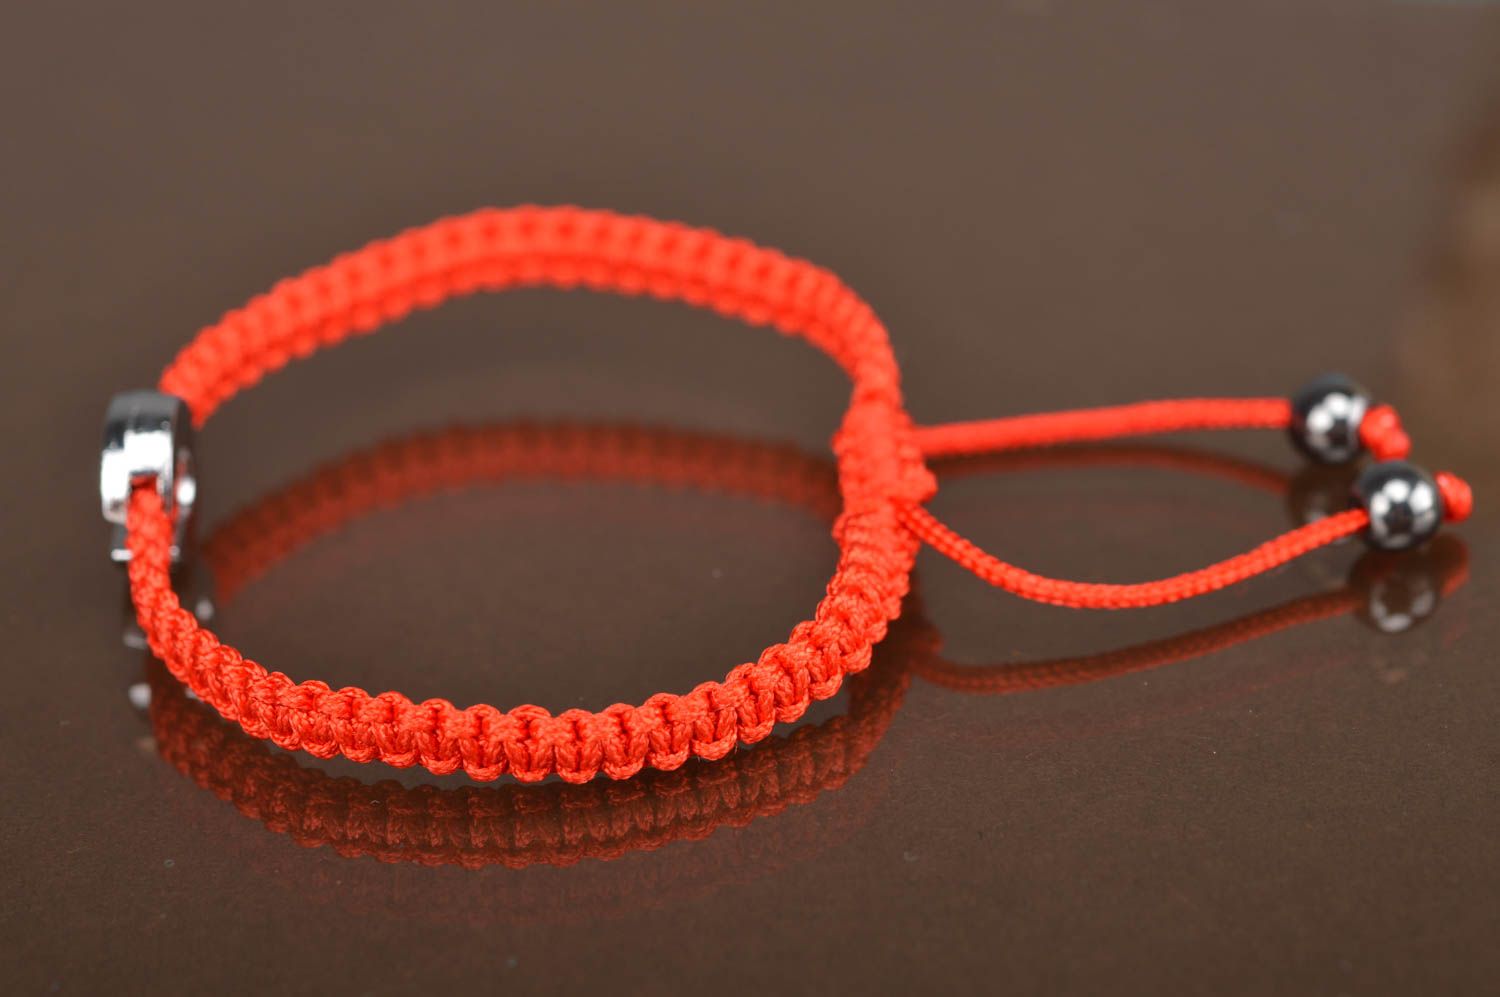 Handmade woven friendship bracelet made of red cords with letter C photo 4